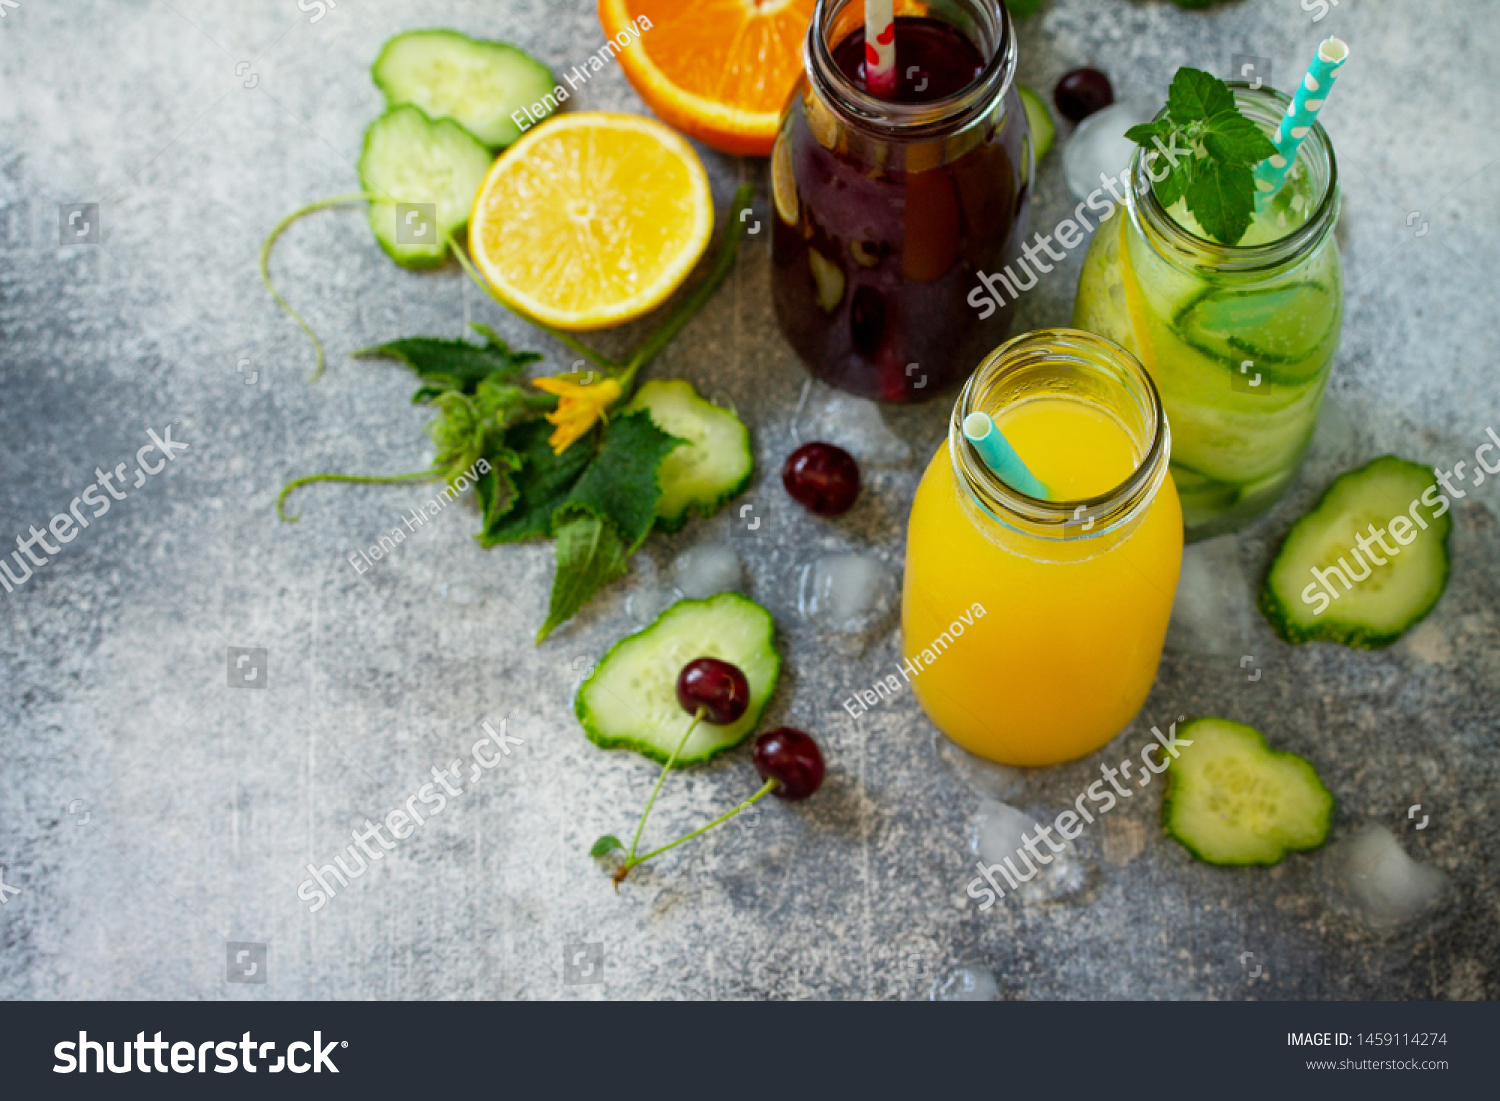 Various refreshments drinks - detox cucumber water, cherry juice and orange juice on stone table. Top view flat lay with copy space for your text. #1459114274